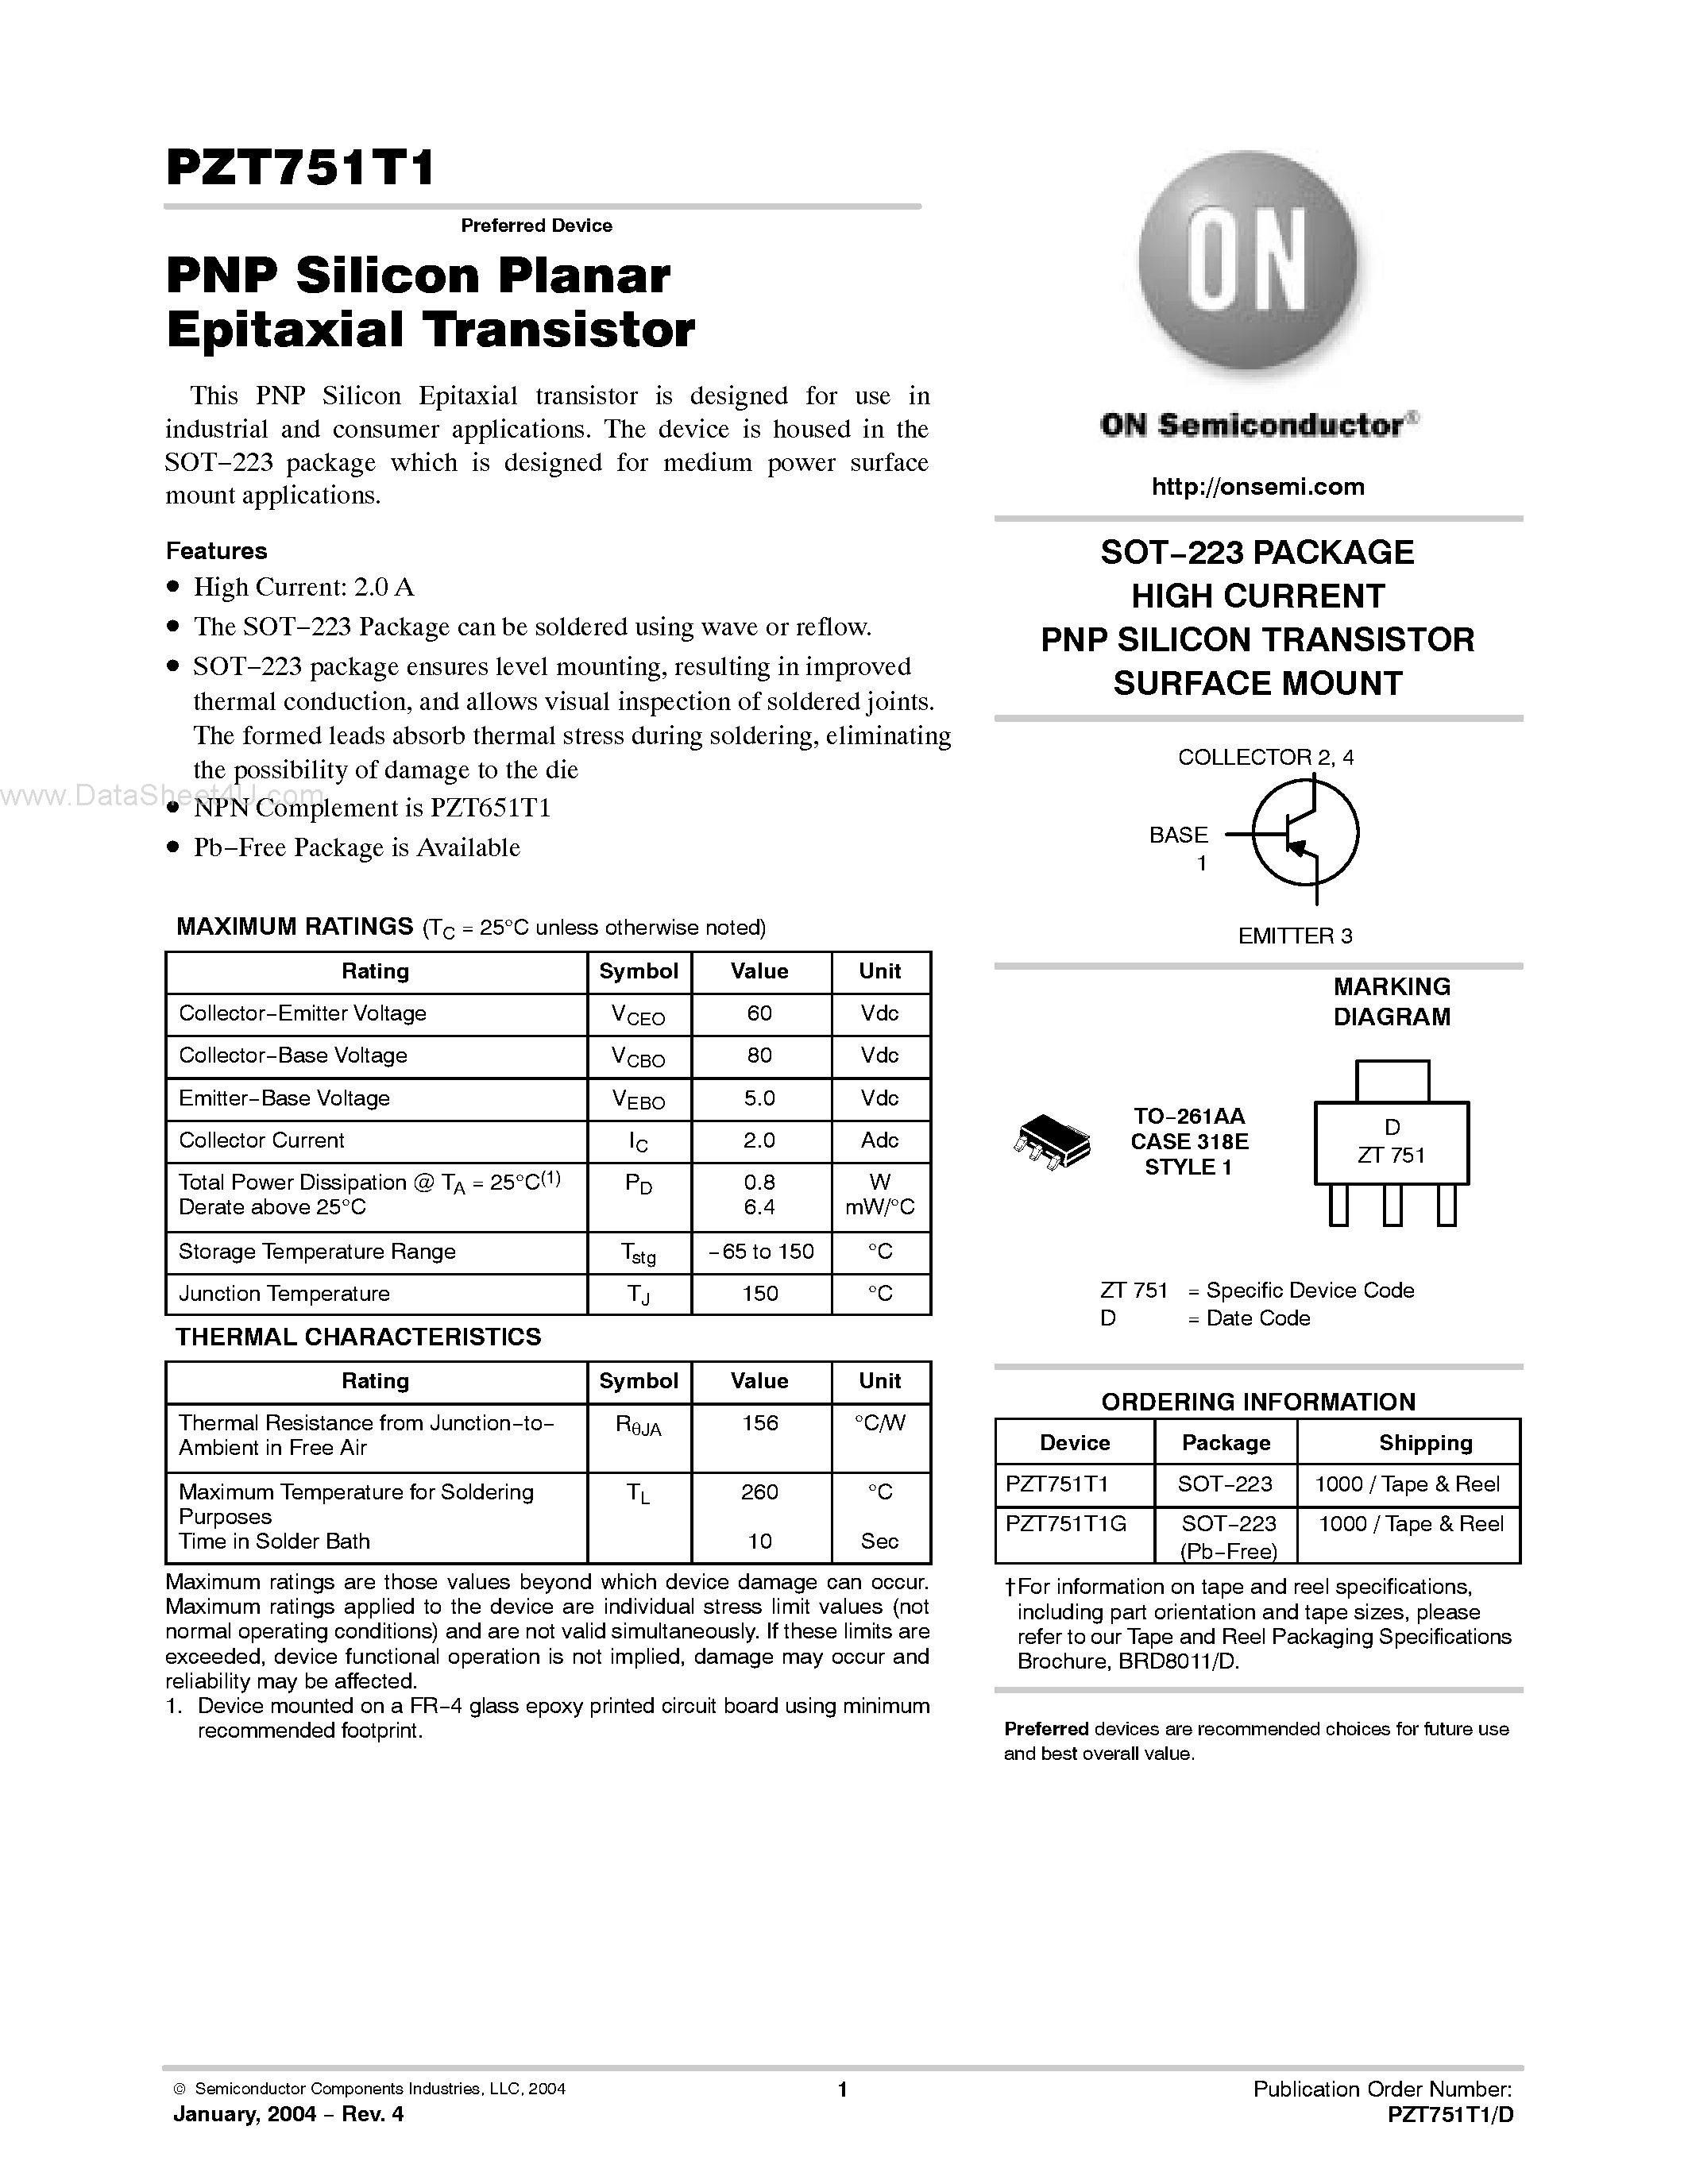 Datasheet PZT751T1 - PNP Silicon Planar Epitaxial Transistor page 1